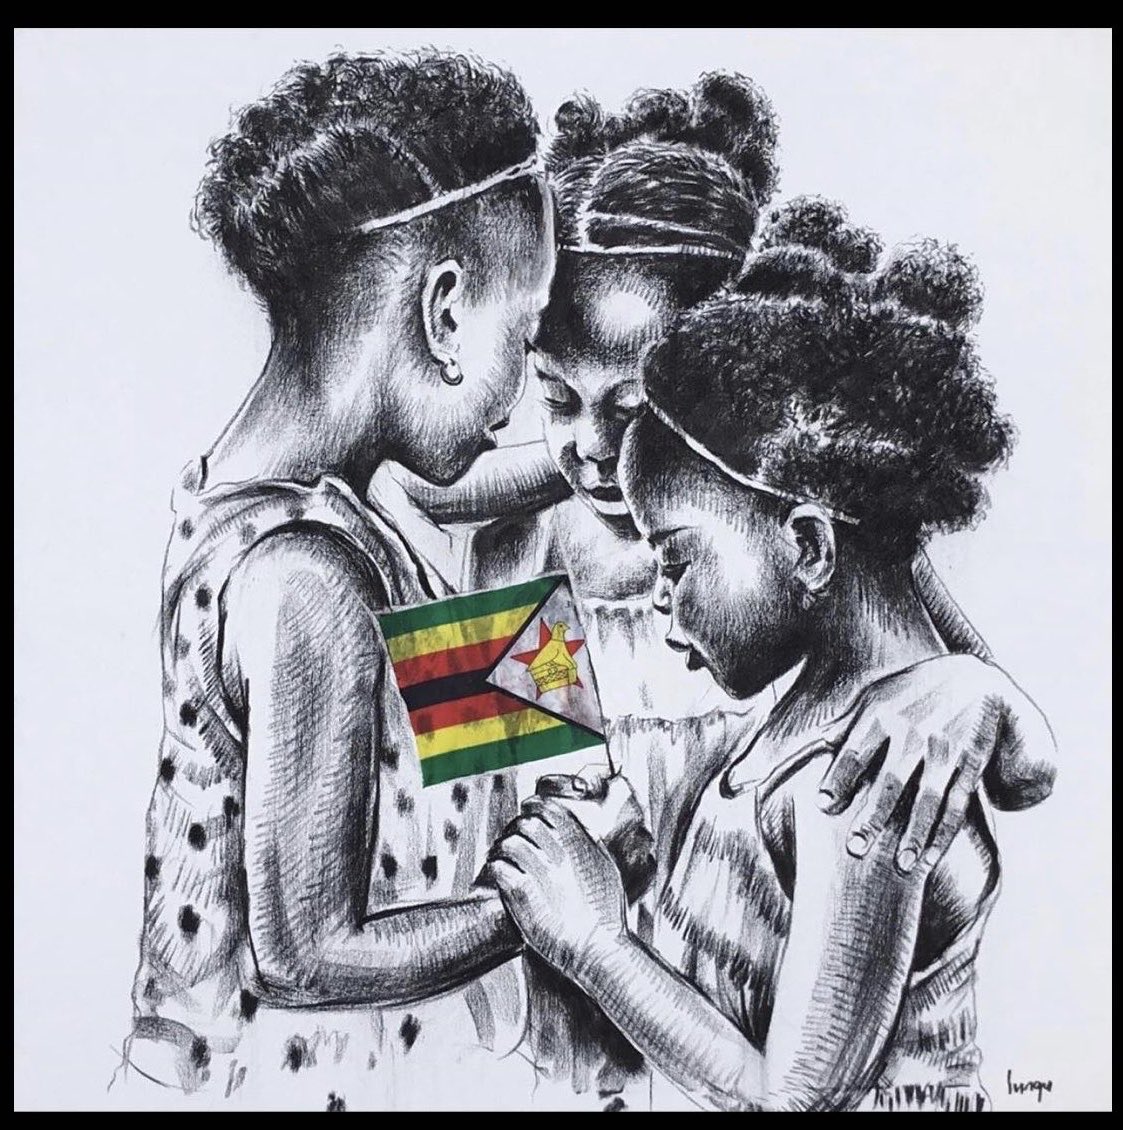 I hate corruption, looting, enrichment of the minority at the expense of the majority, and gross human rights violations. But #IloveZimbabwe #ZimbabweanLivesMatter